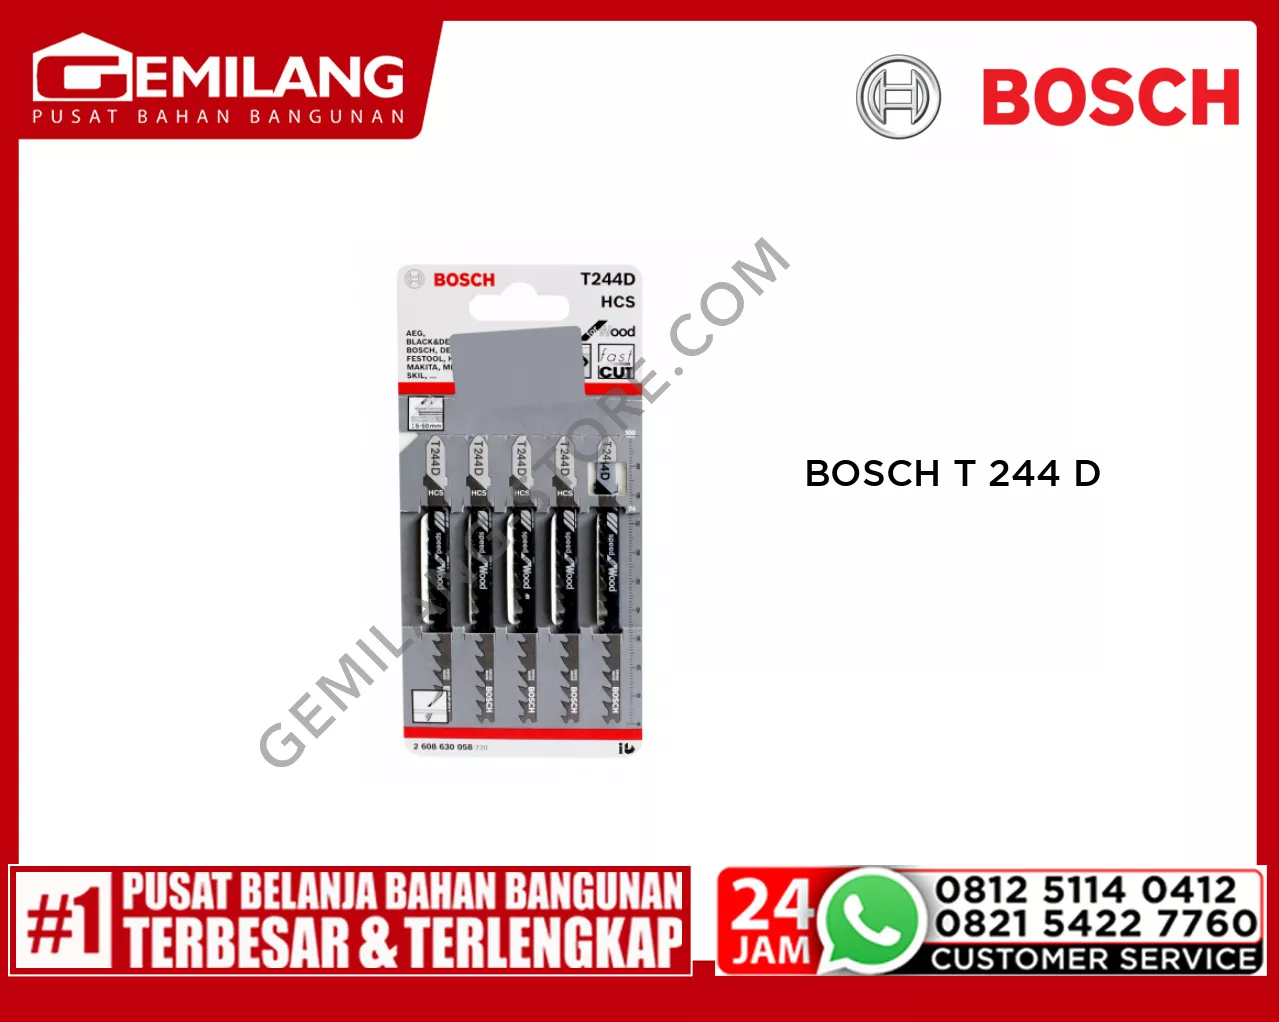 BOSCH T 244 D (PACK OF 5pc)